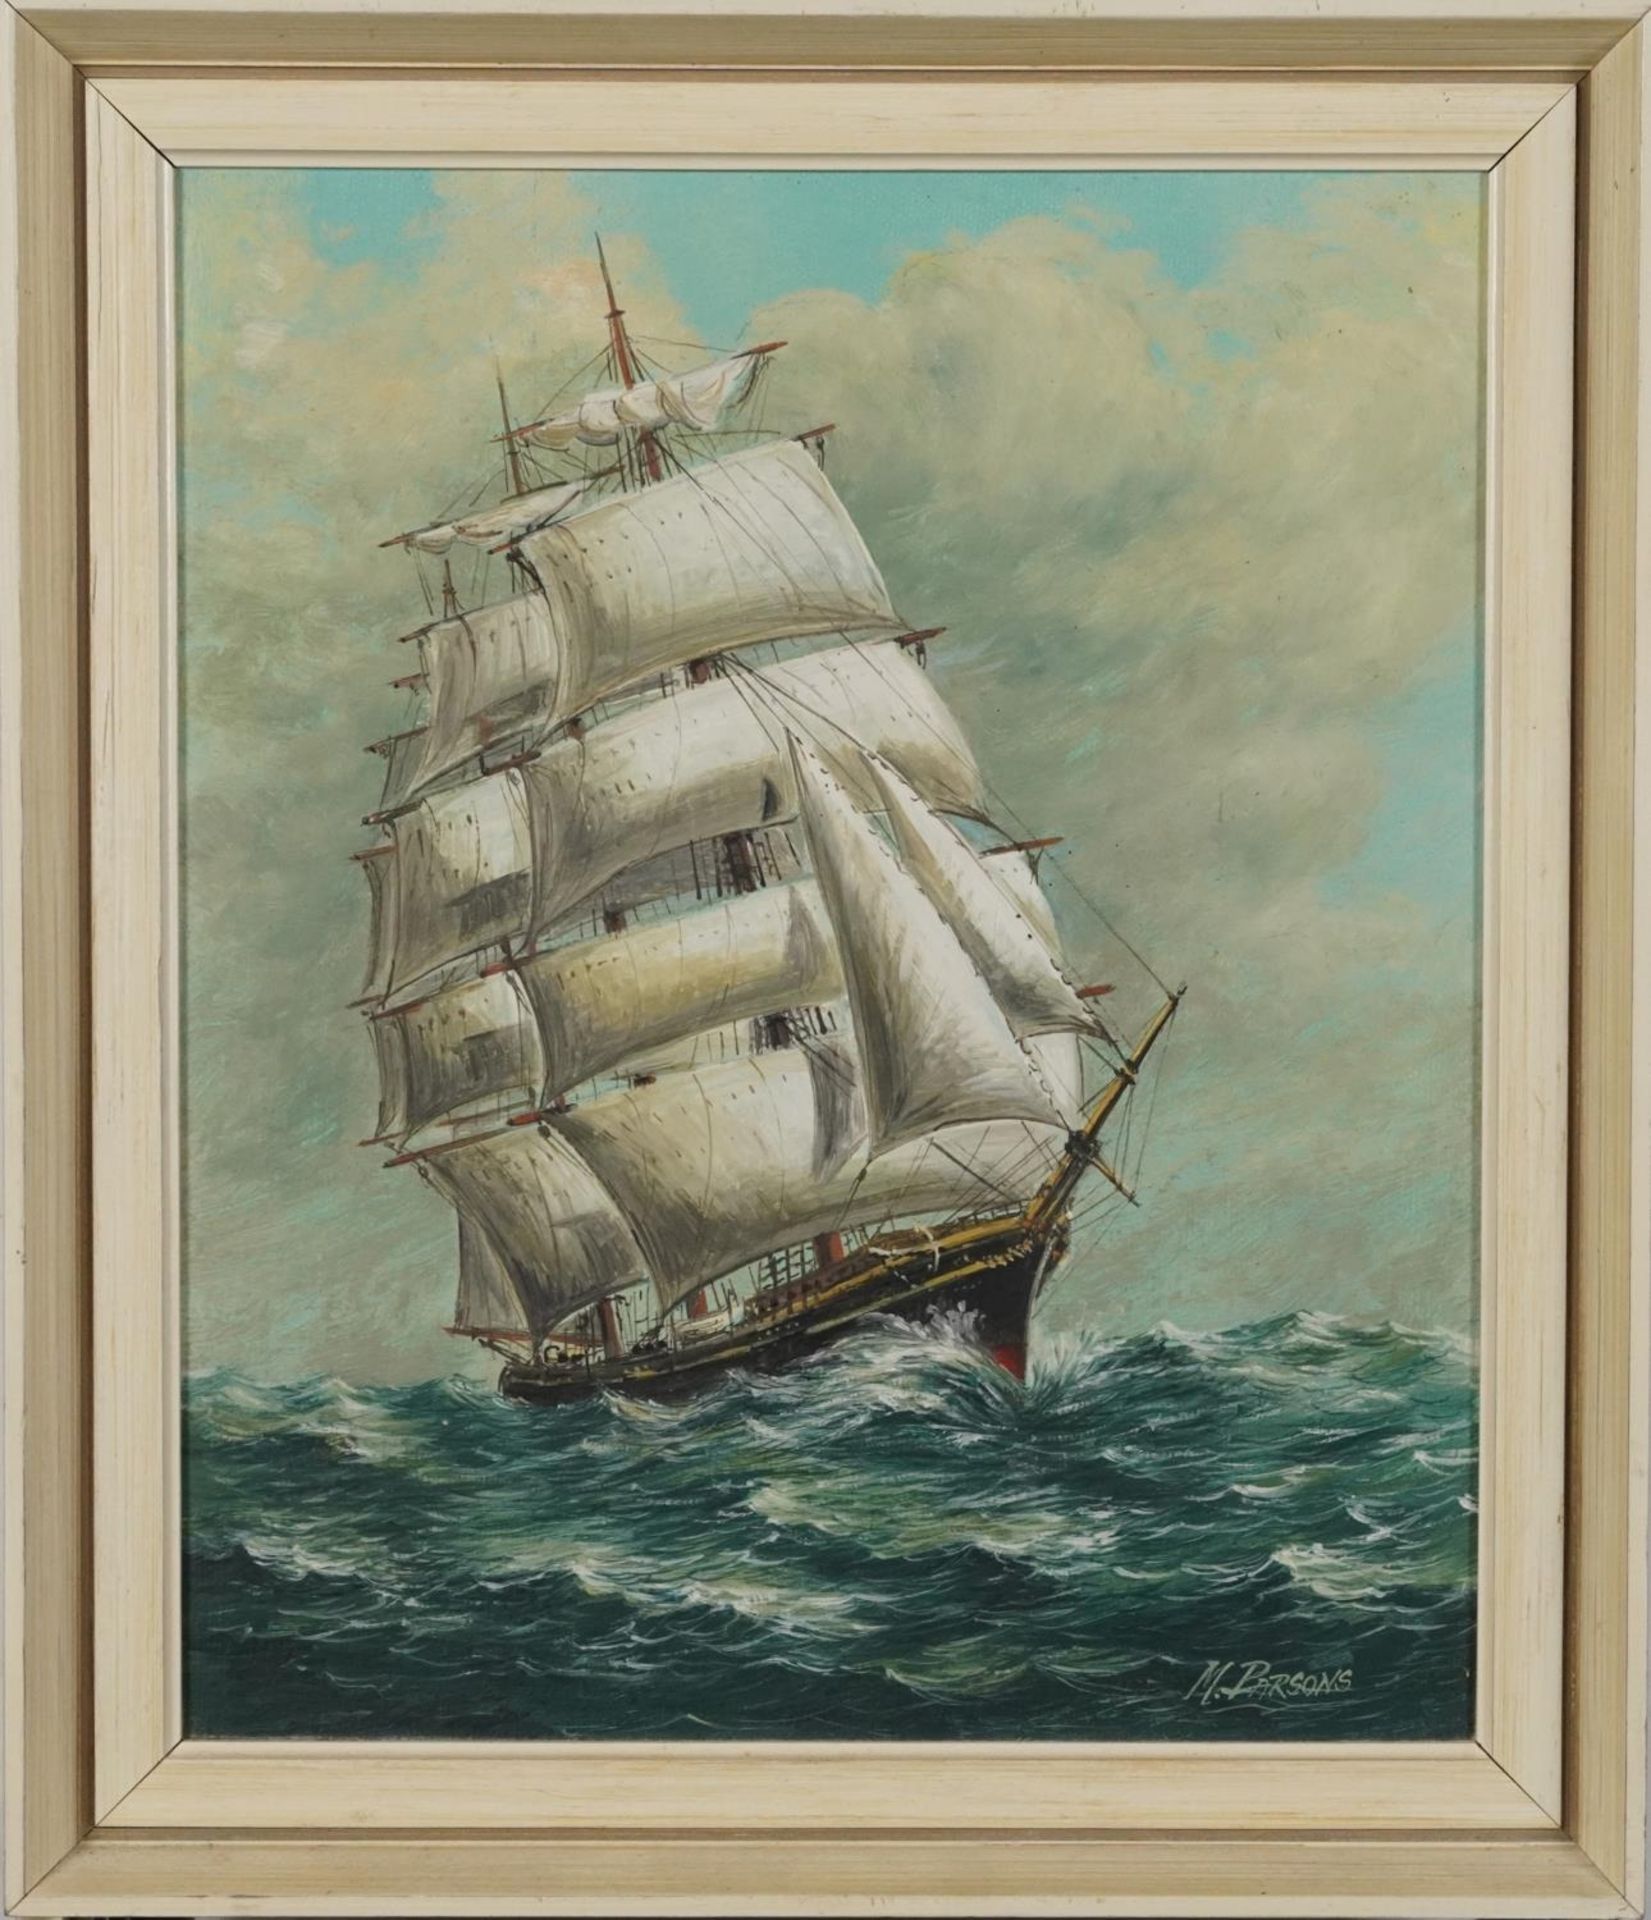 Max Parsons - Schooner at Sea, maritime interest oil on board, mounted and framed, 29cm x 24.5cm - Image 2 of 4